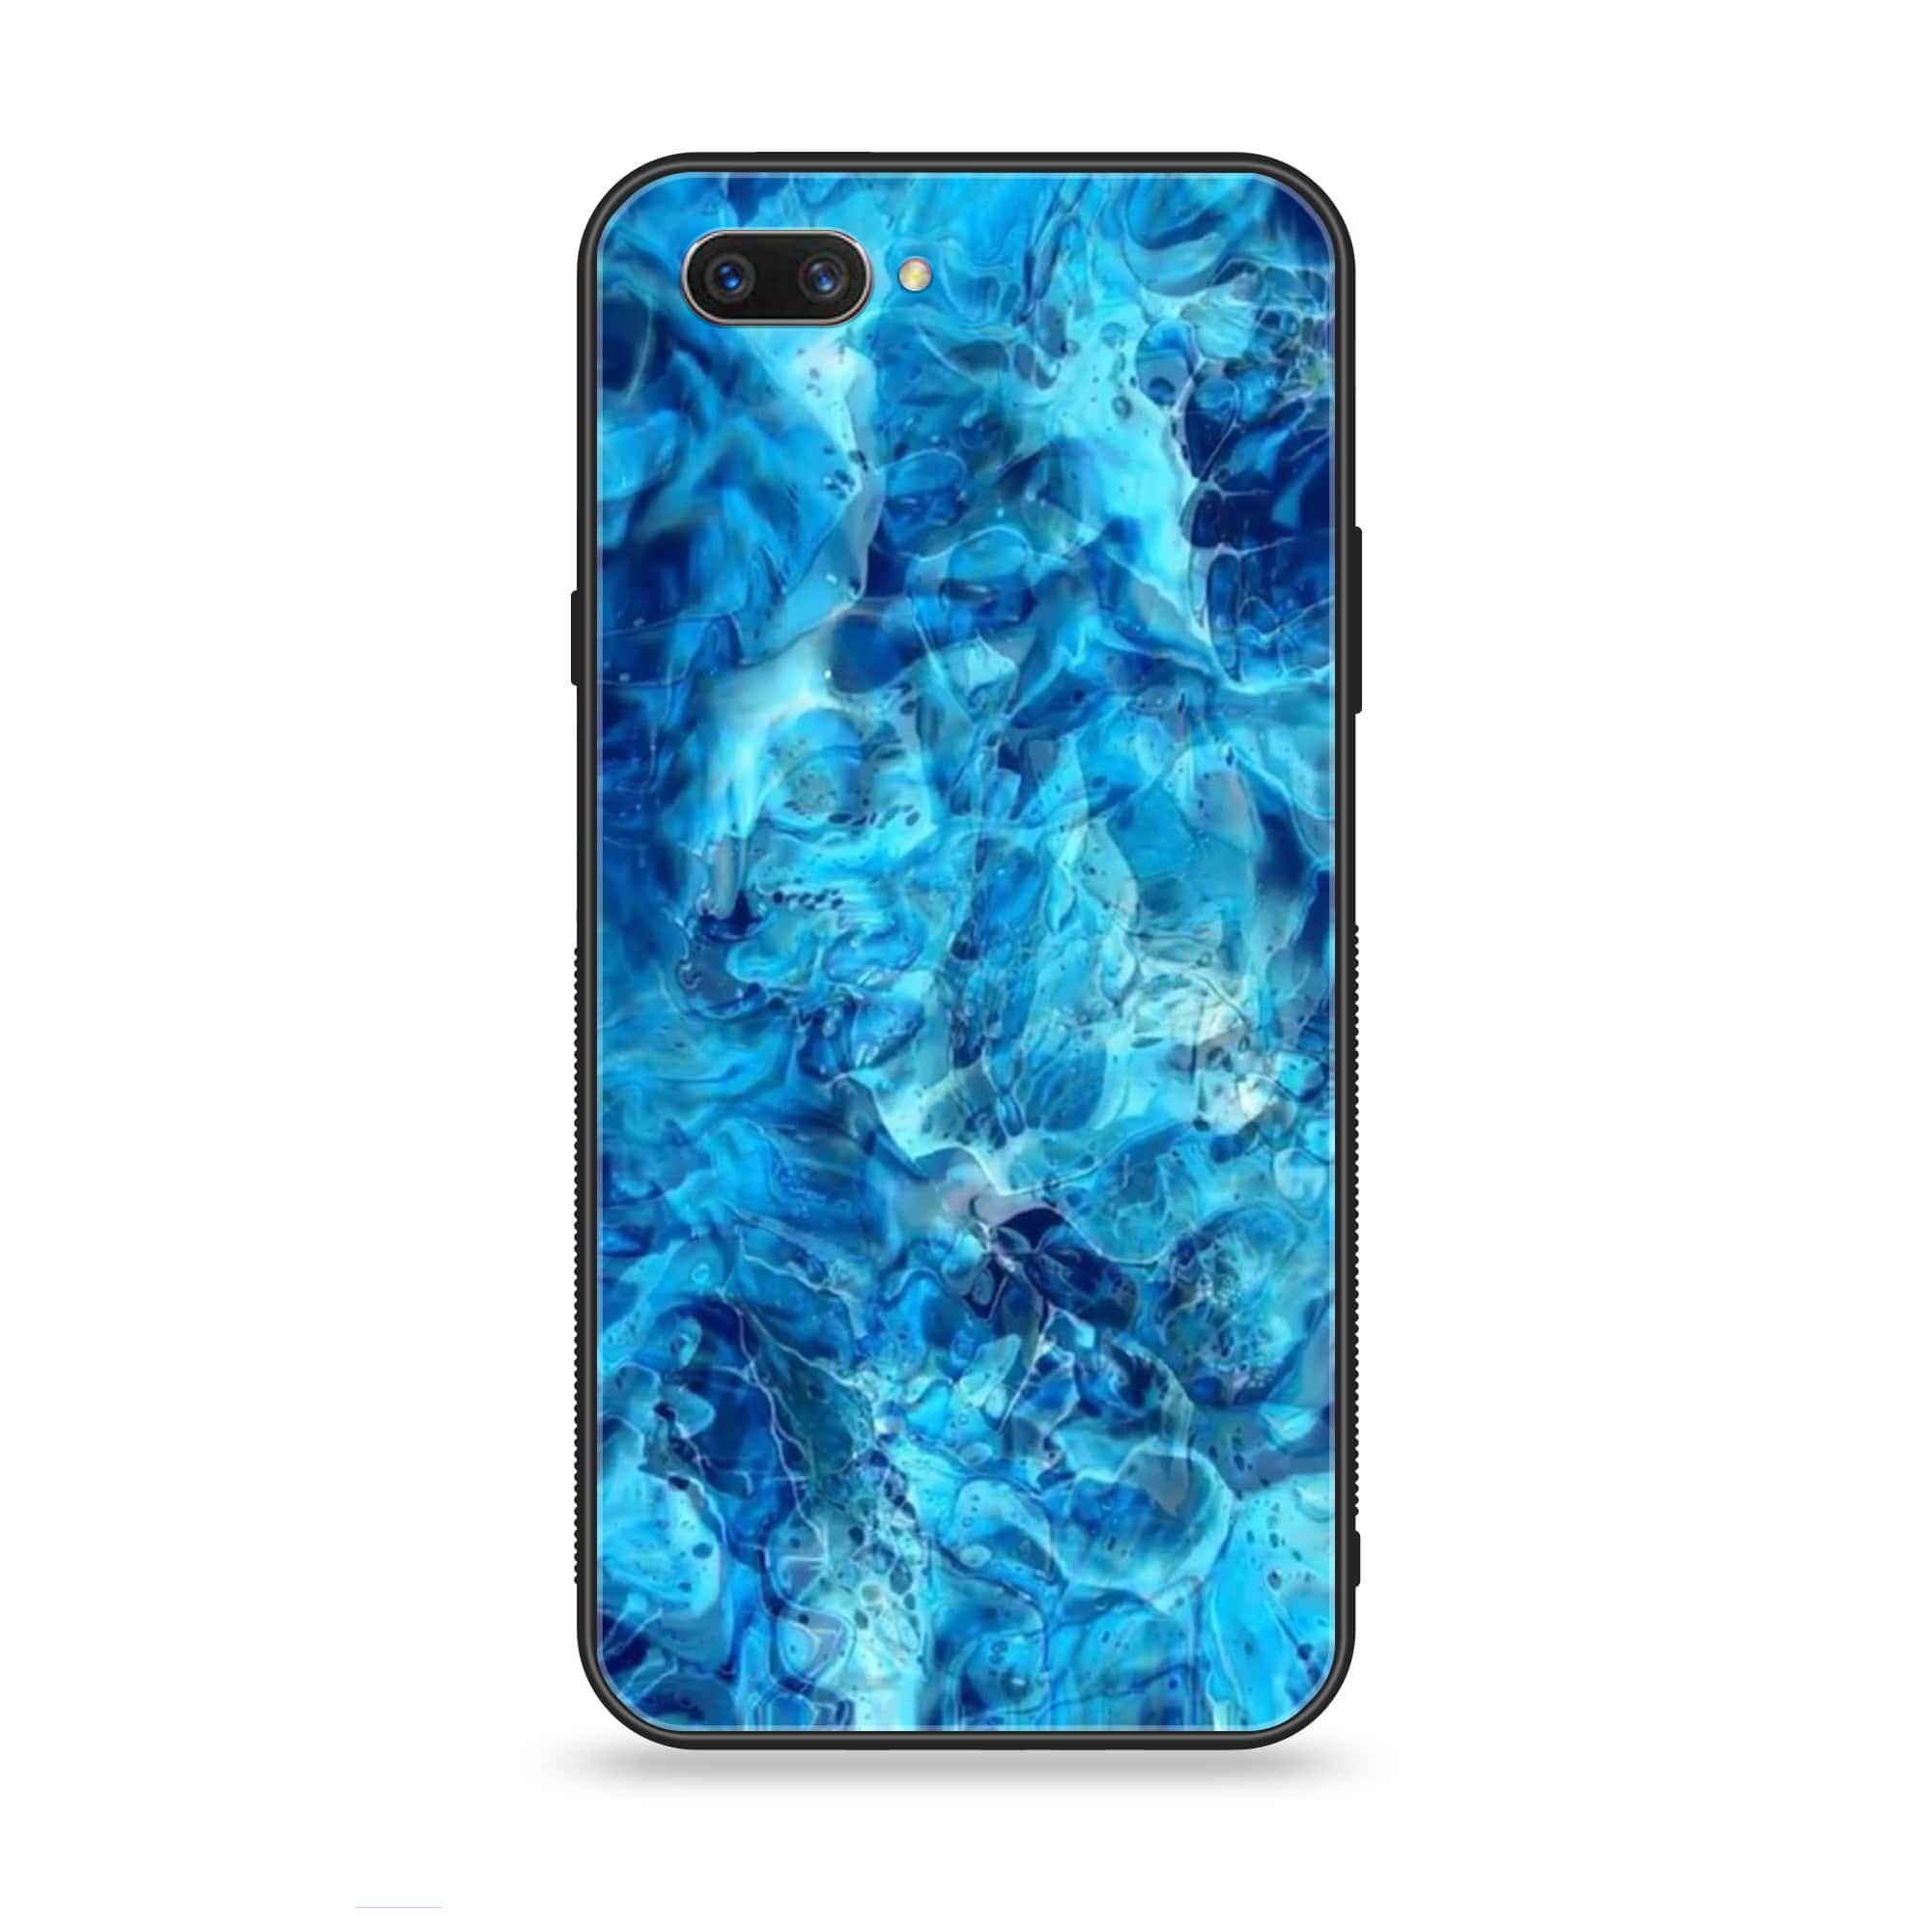 Oppo A3s - Blue Marble Series - Premium Printed Glass soft Bumper shock Proof Case